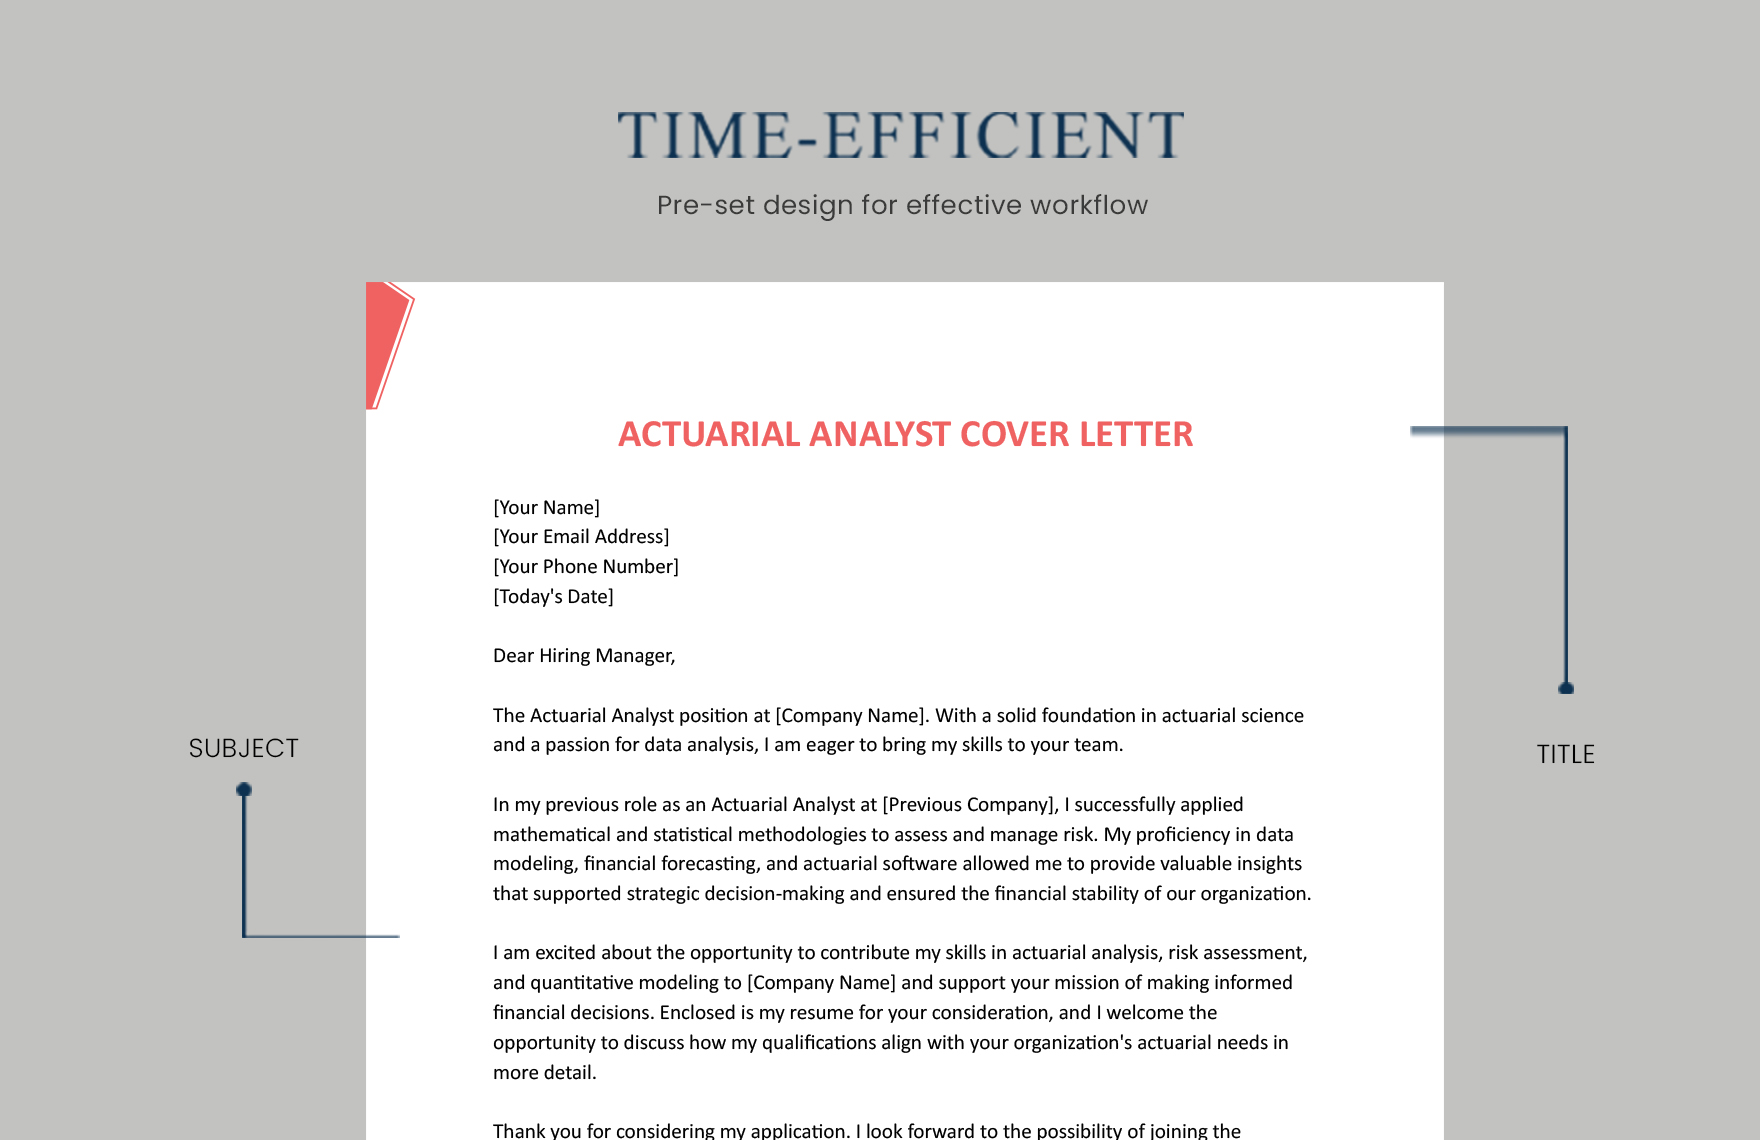 Actuarial Analyst Cover Letter